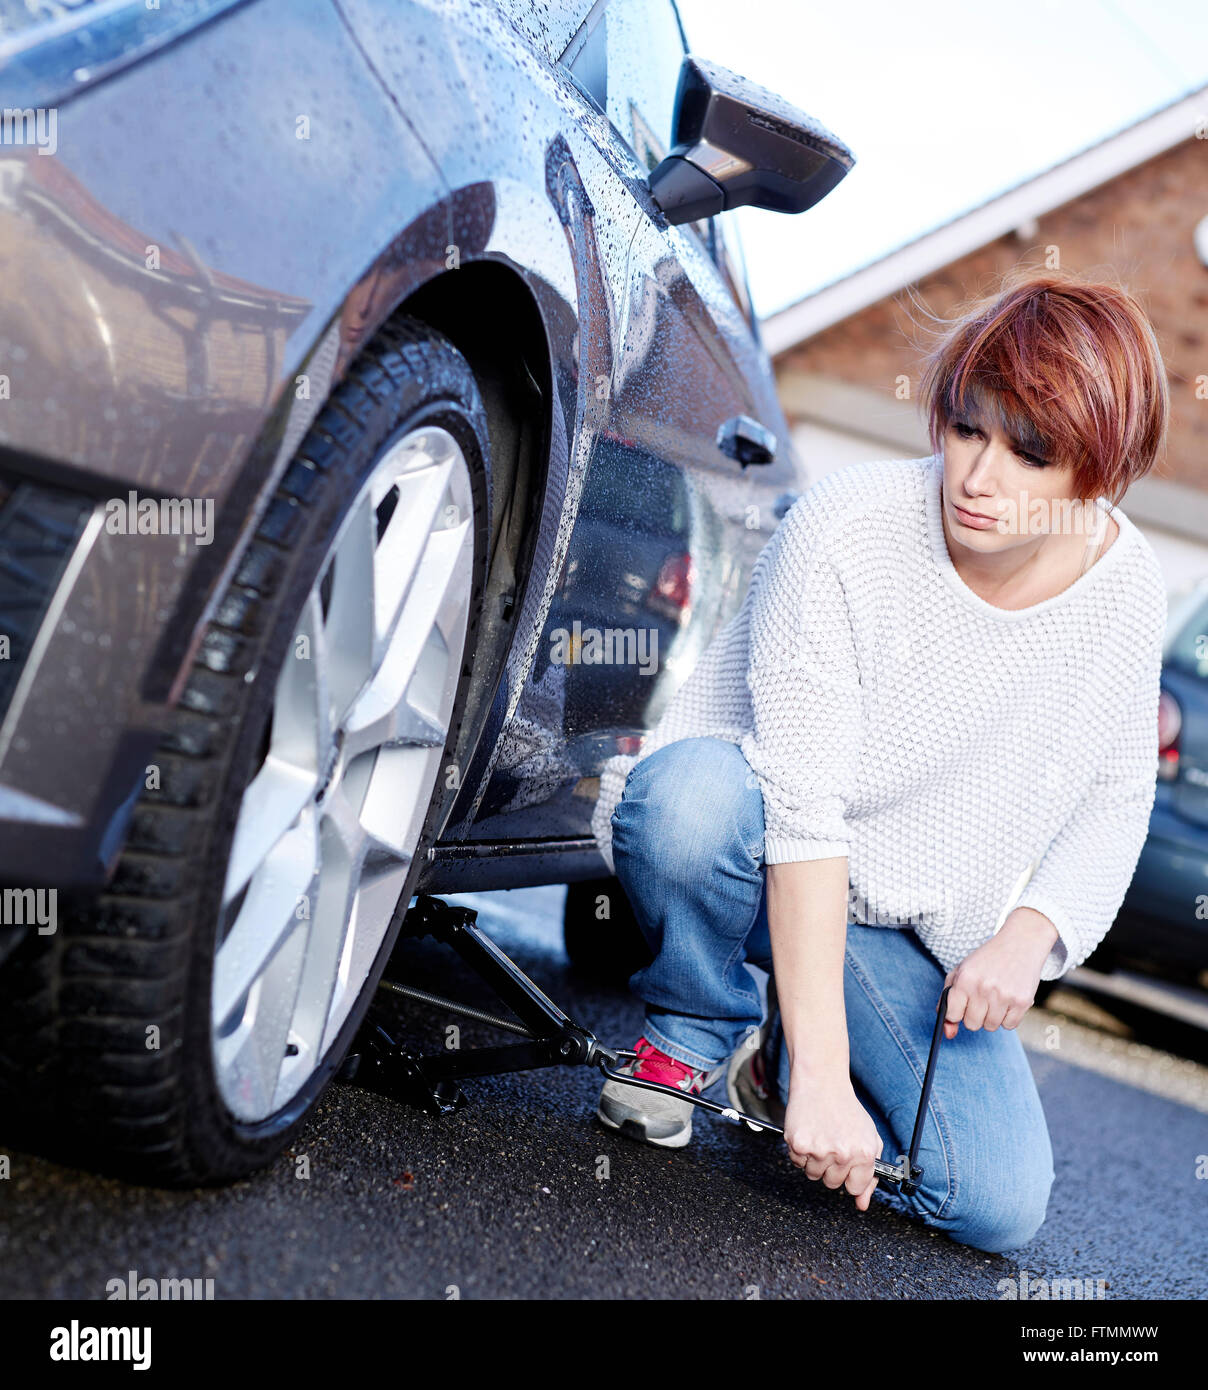 Woman changing wheel on her car Stock Photo